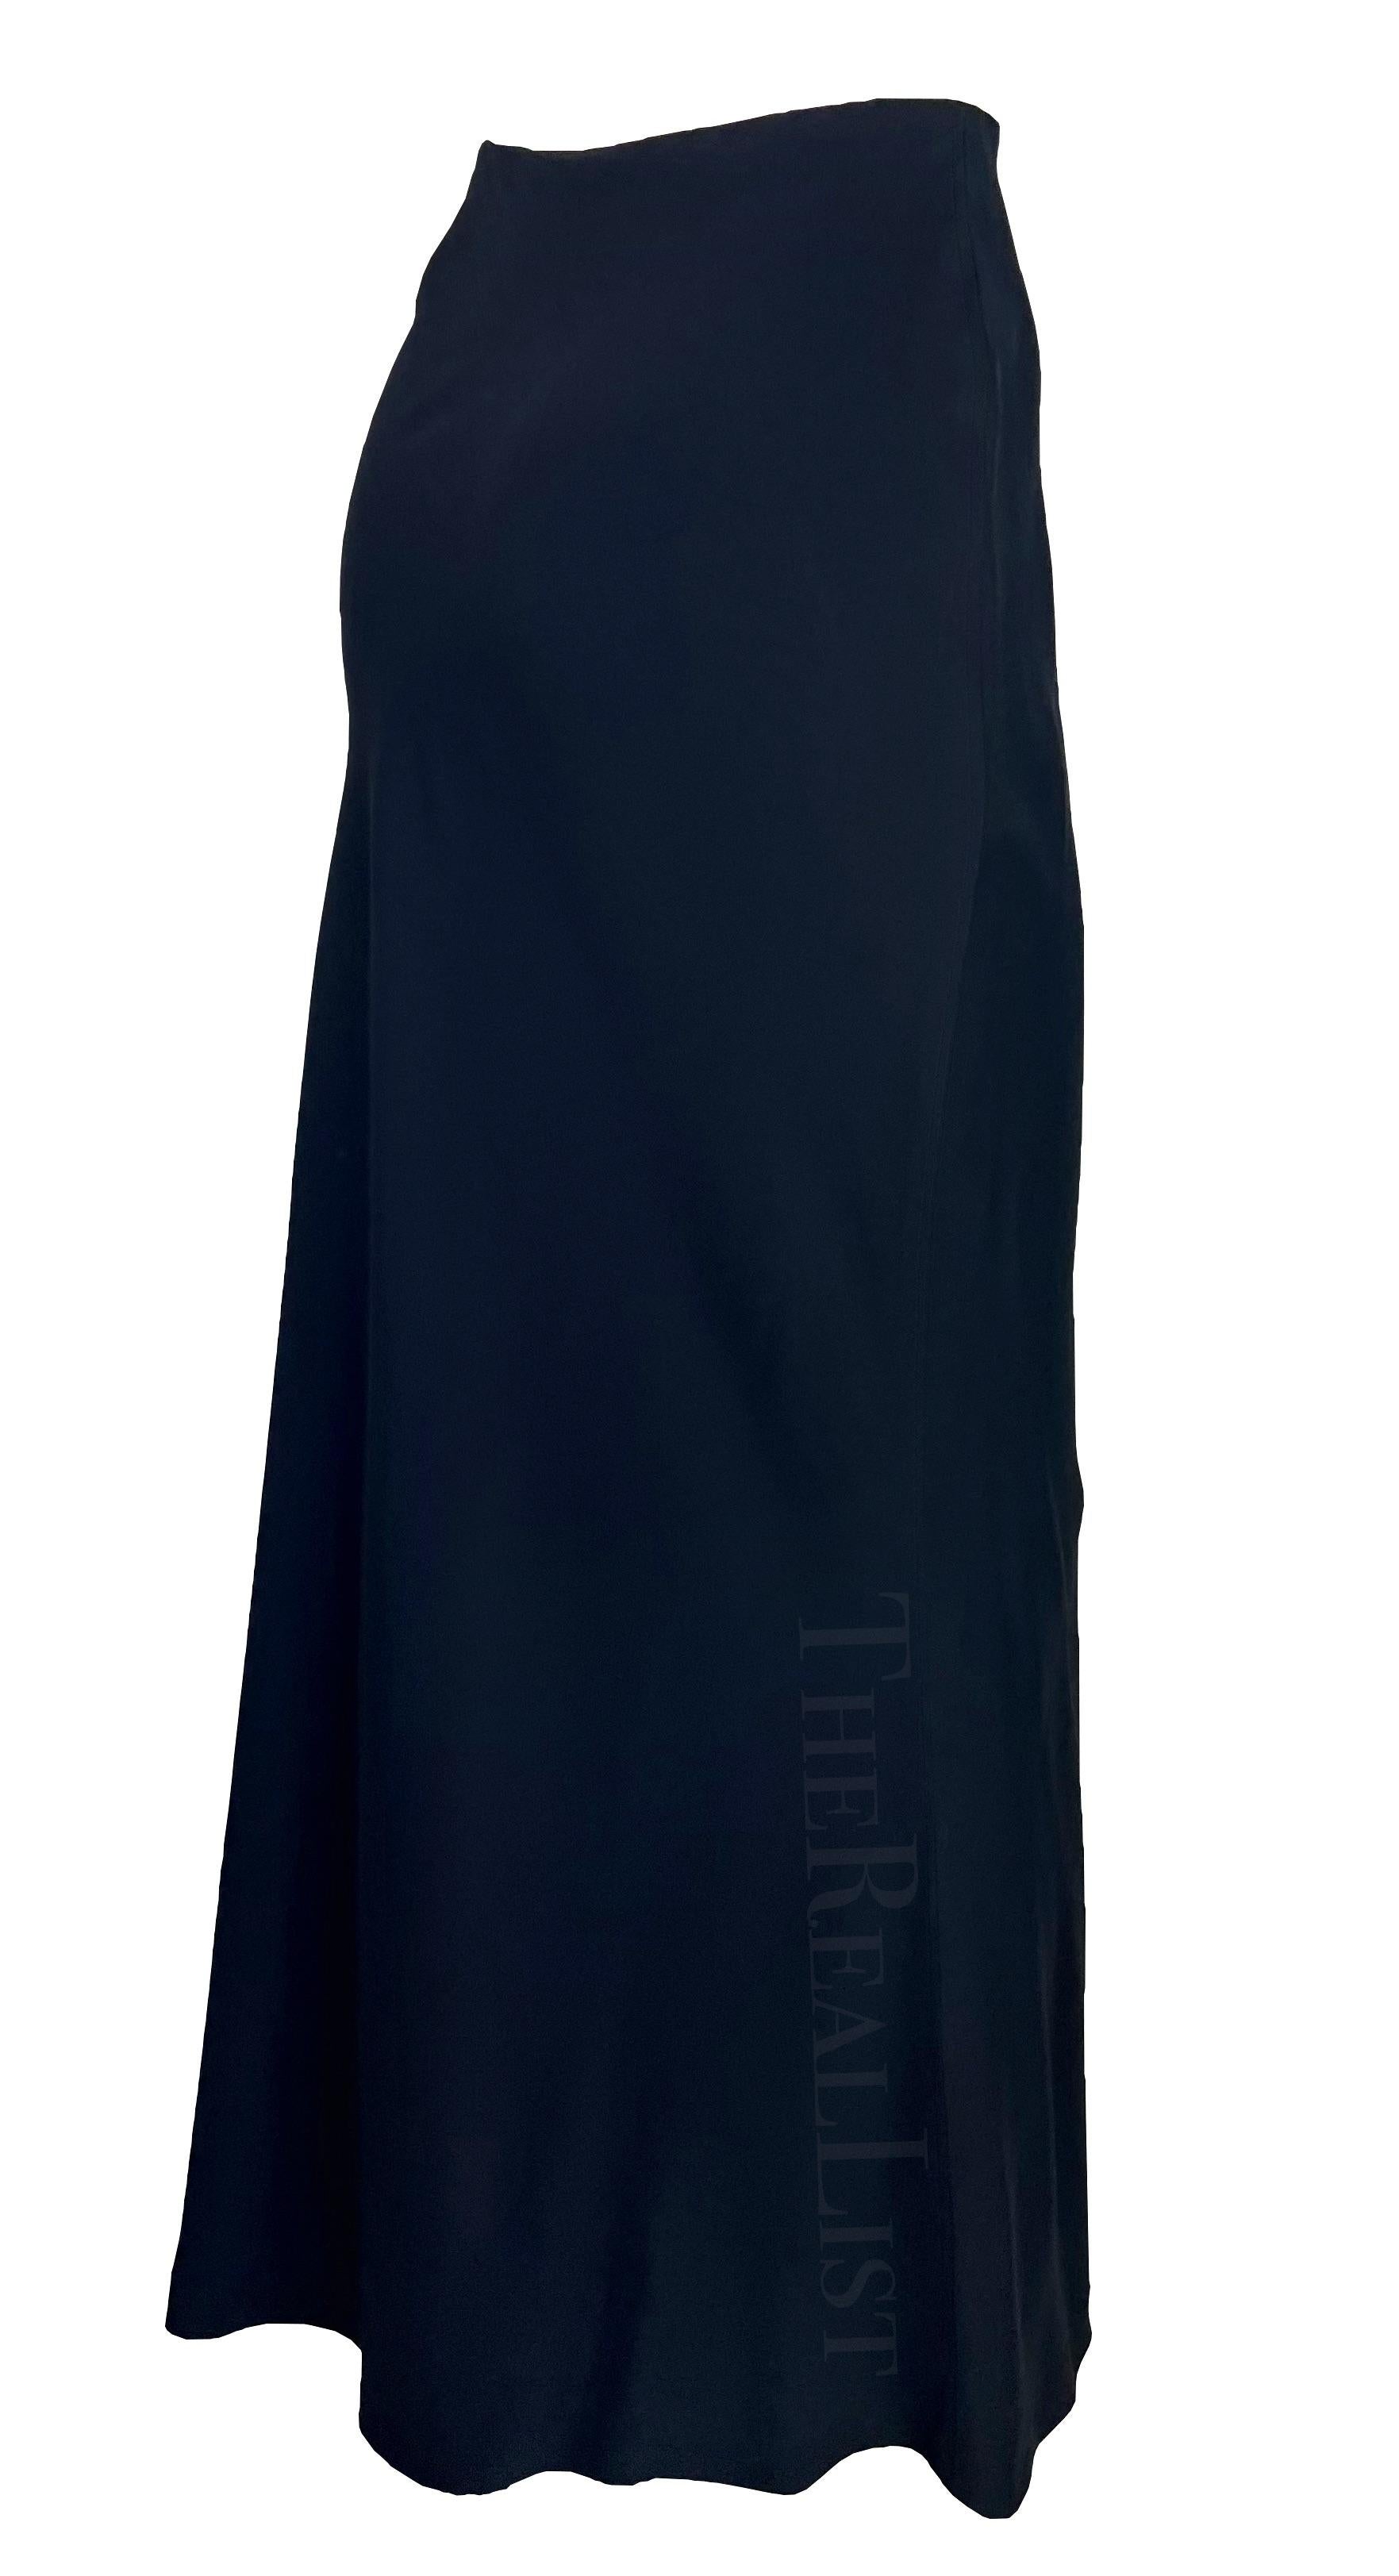 NWT S/S 1996 Gucci by Tom Ford Navy Bodycon Stretch Maxi Skirt For Sale 1